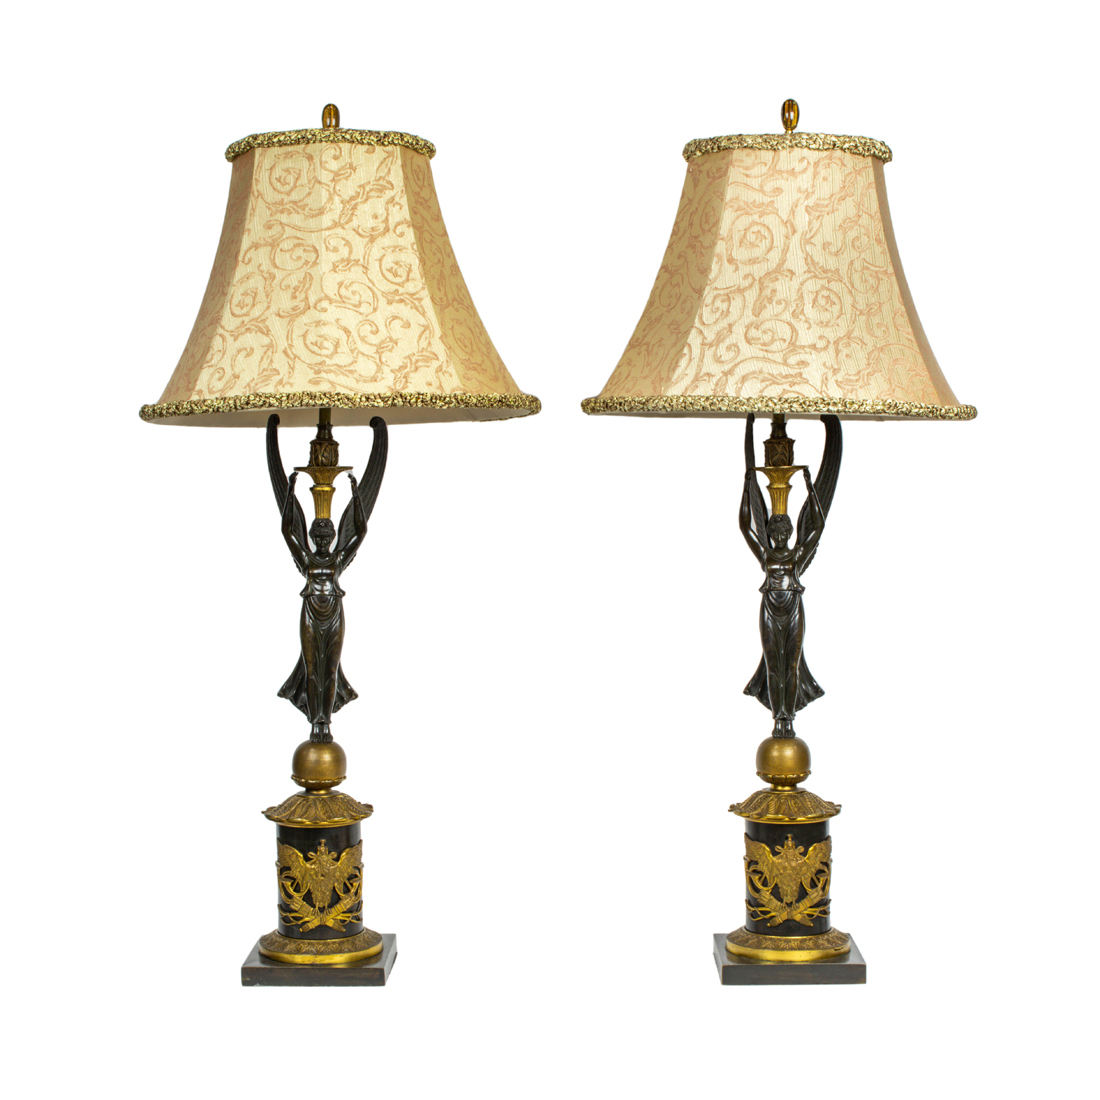 A PAIR OF FRENCH EMPIRE GILT AND 2d0ec7